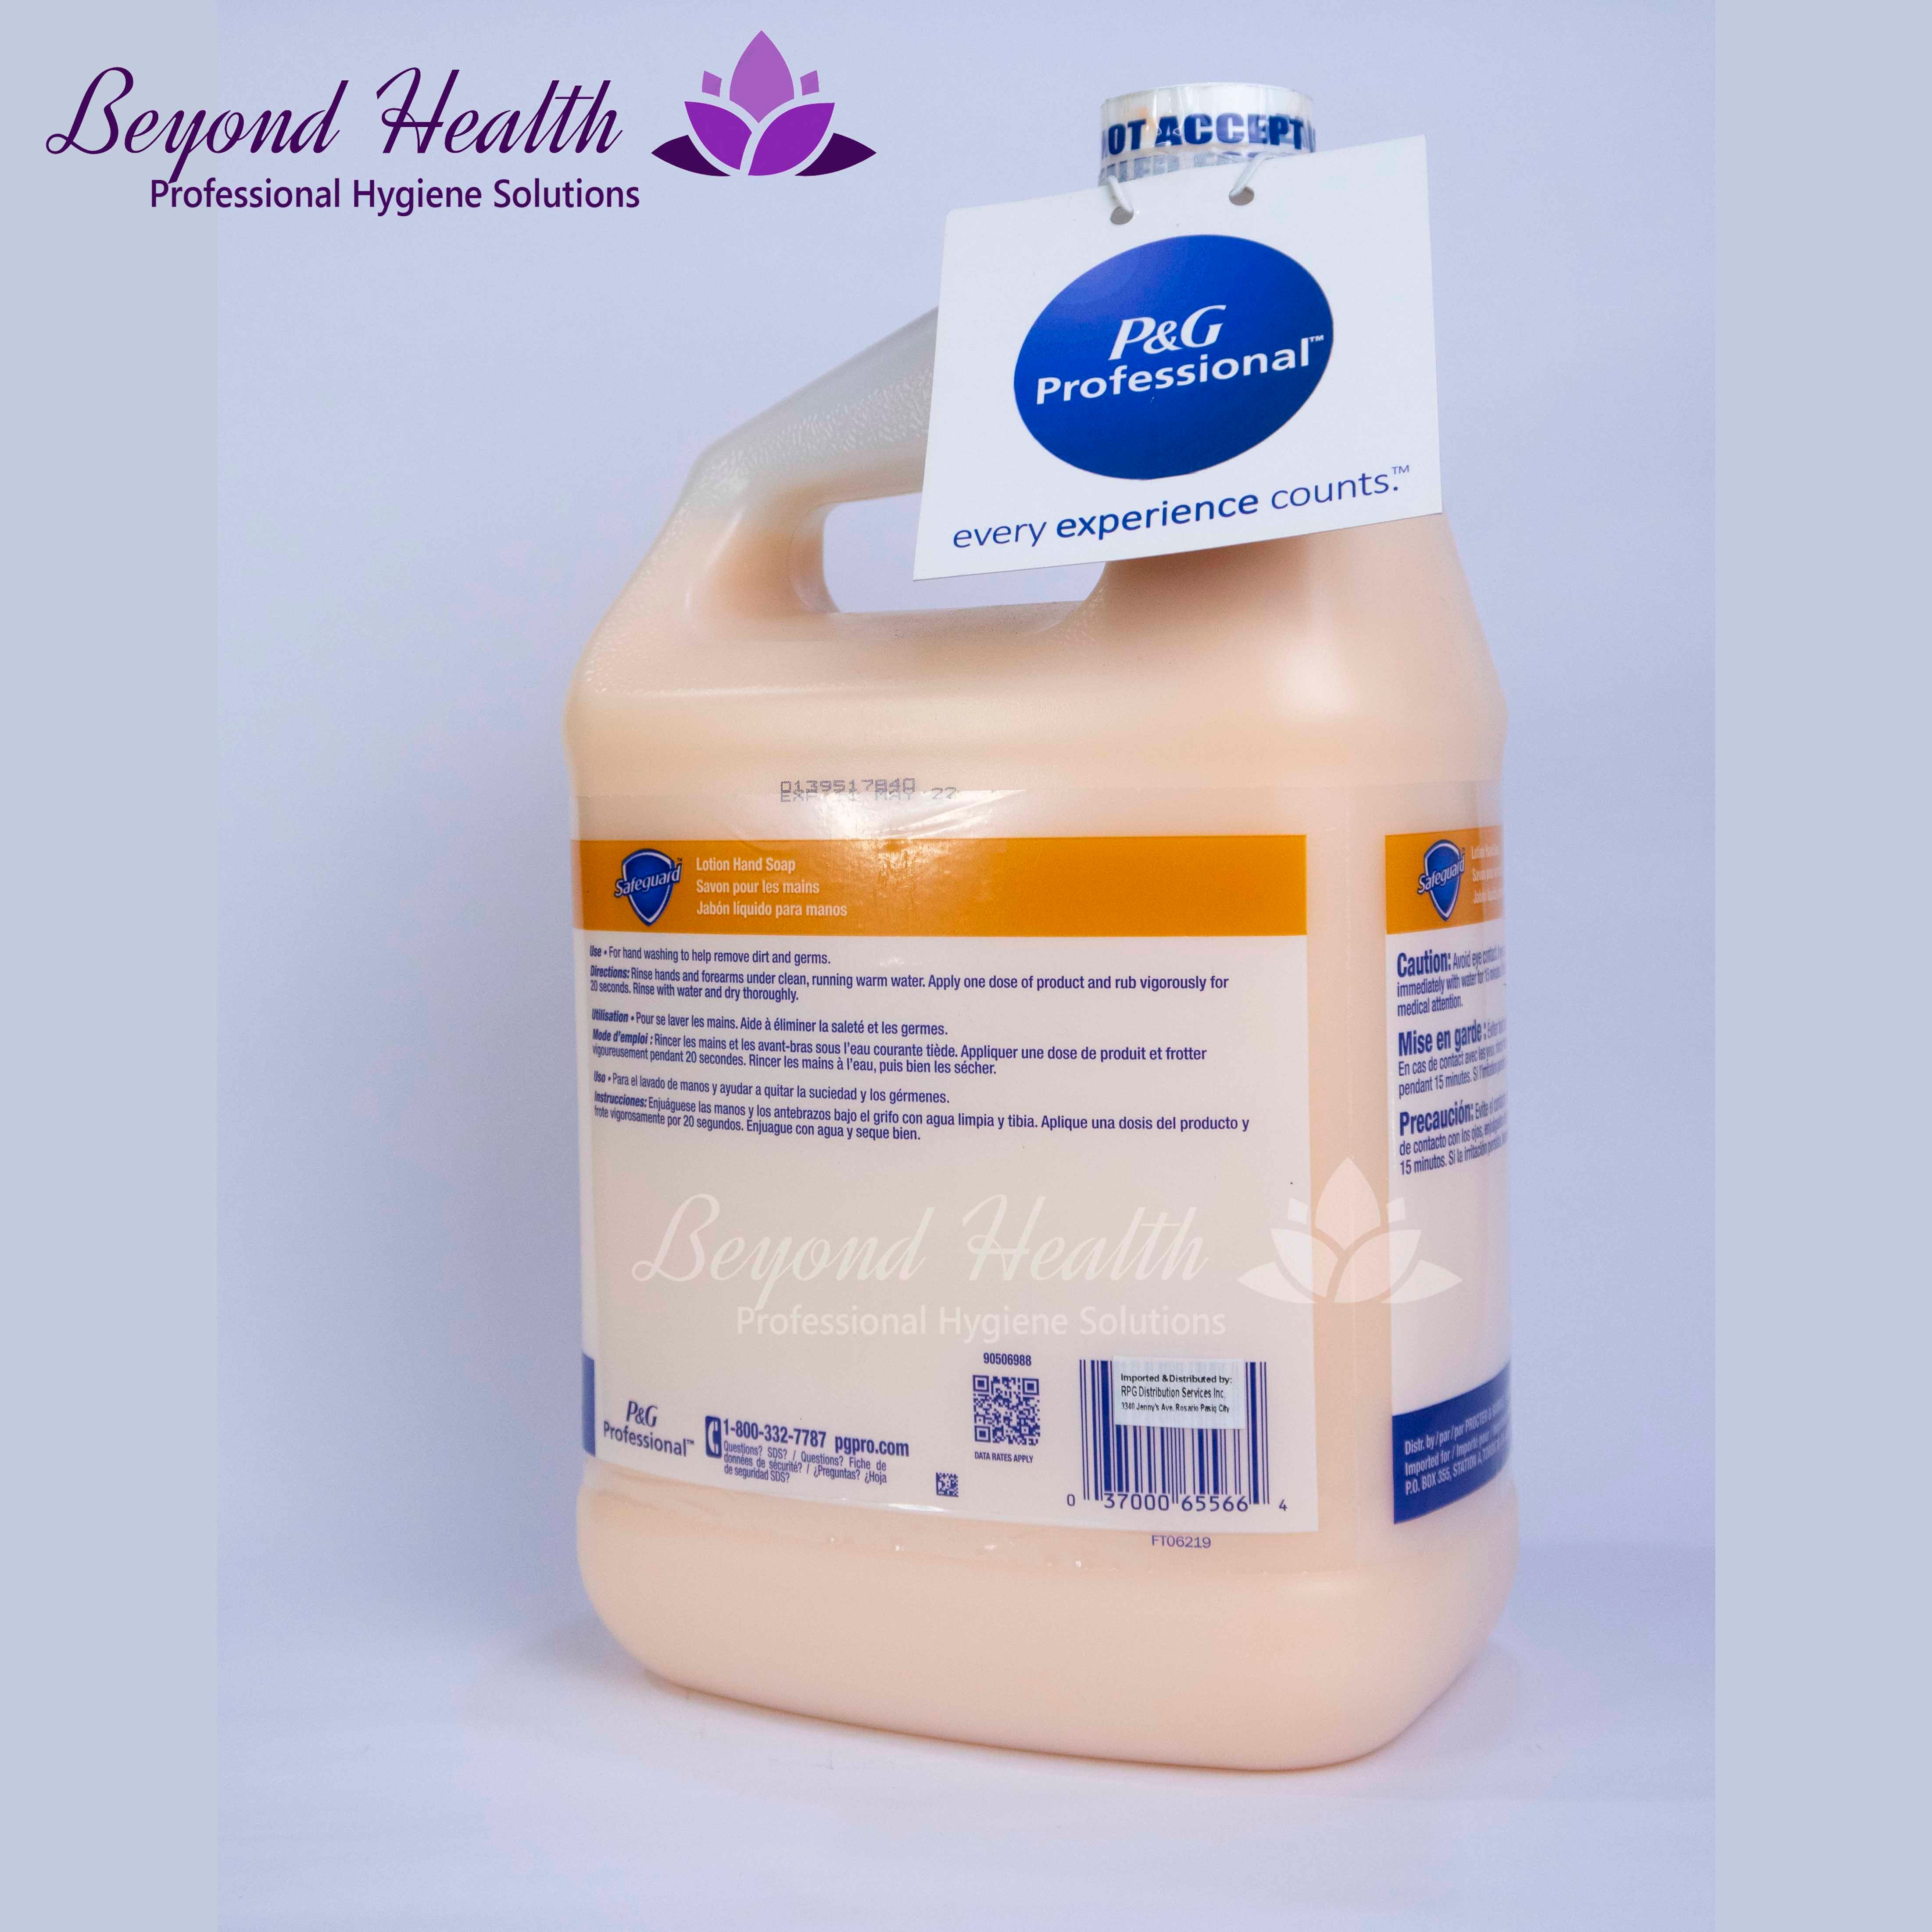 Safeguard® Lotion Hand Soap Antibacterial 3.78L